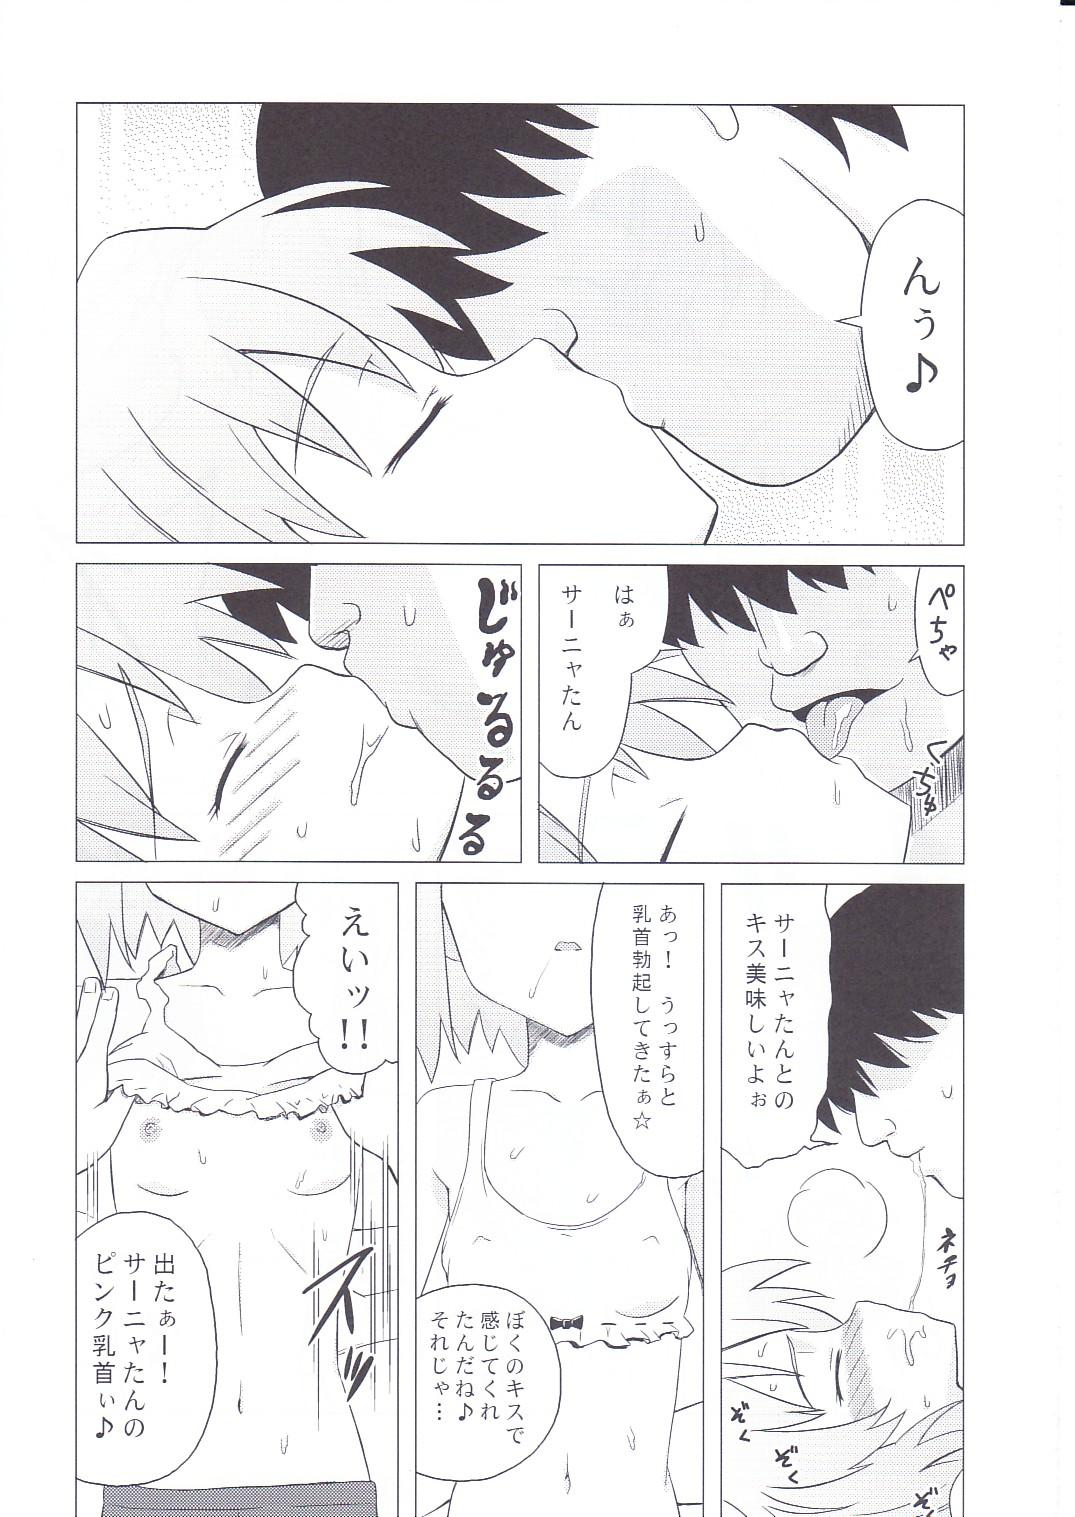 Piercings Sleeping witches - Strike witches Bed - Page 6